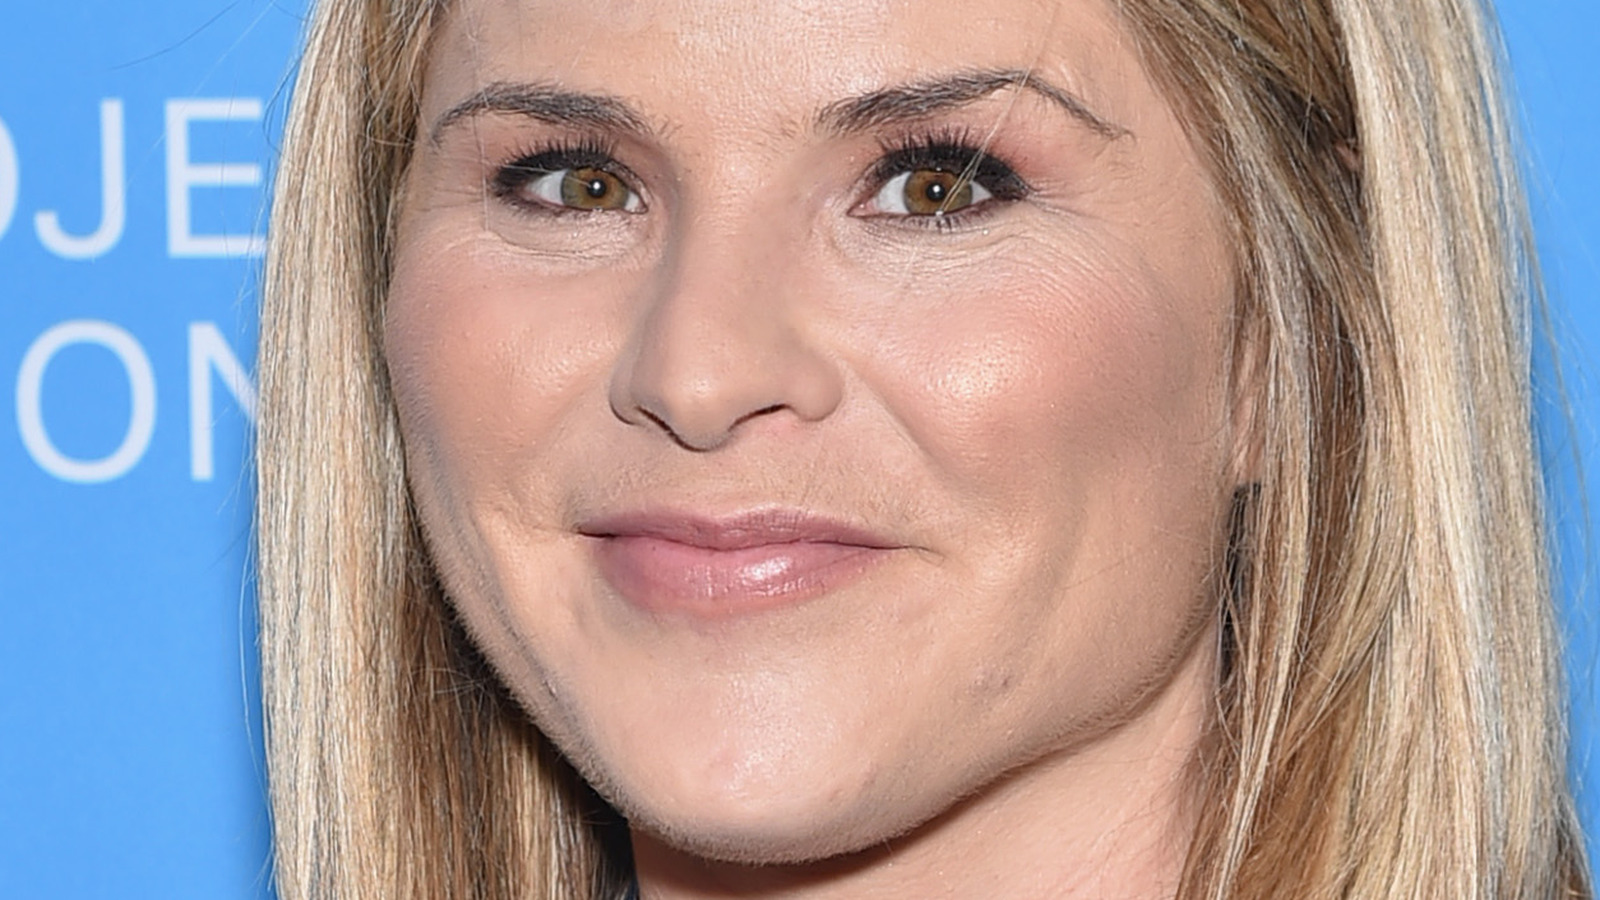 Jenna Bush Hager tells the story of Mila’s painful camp letter.